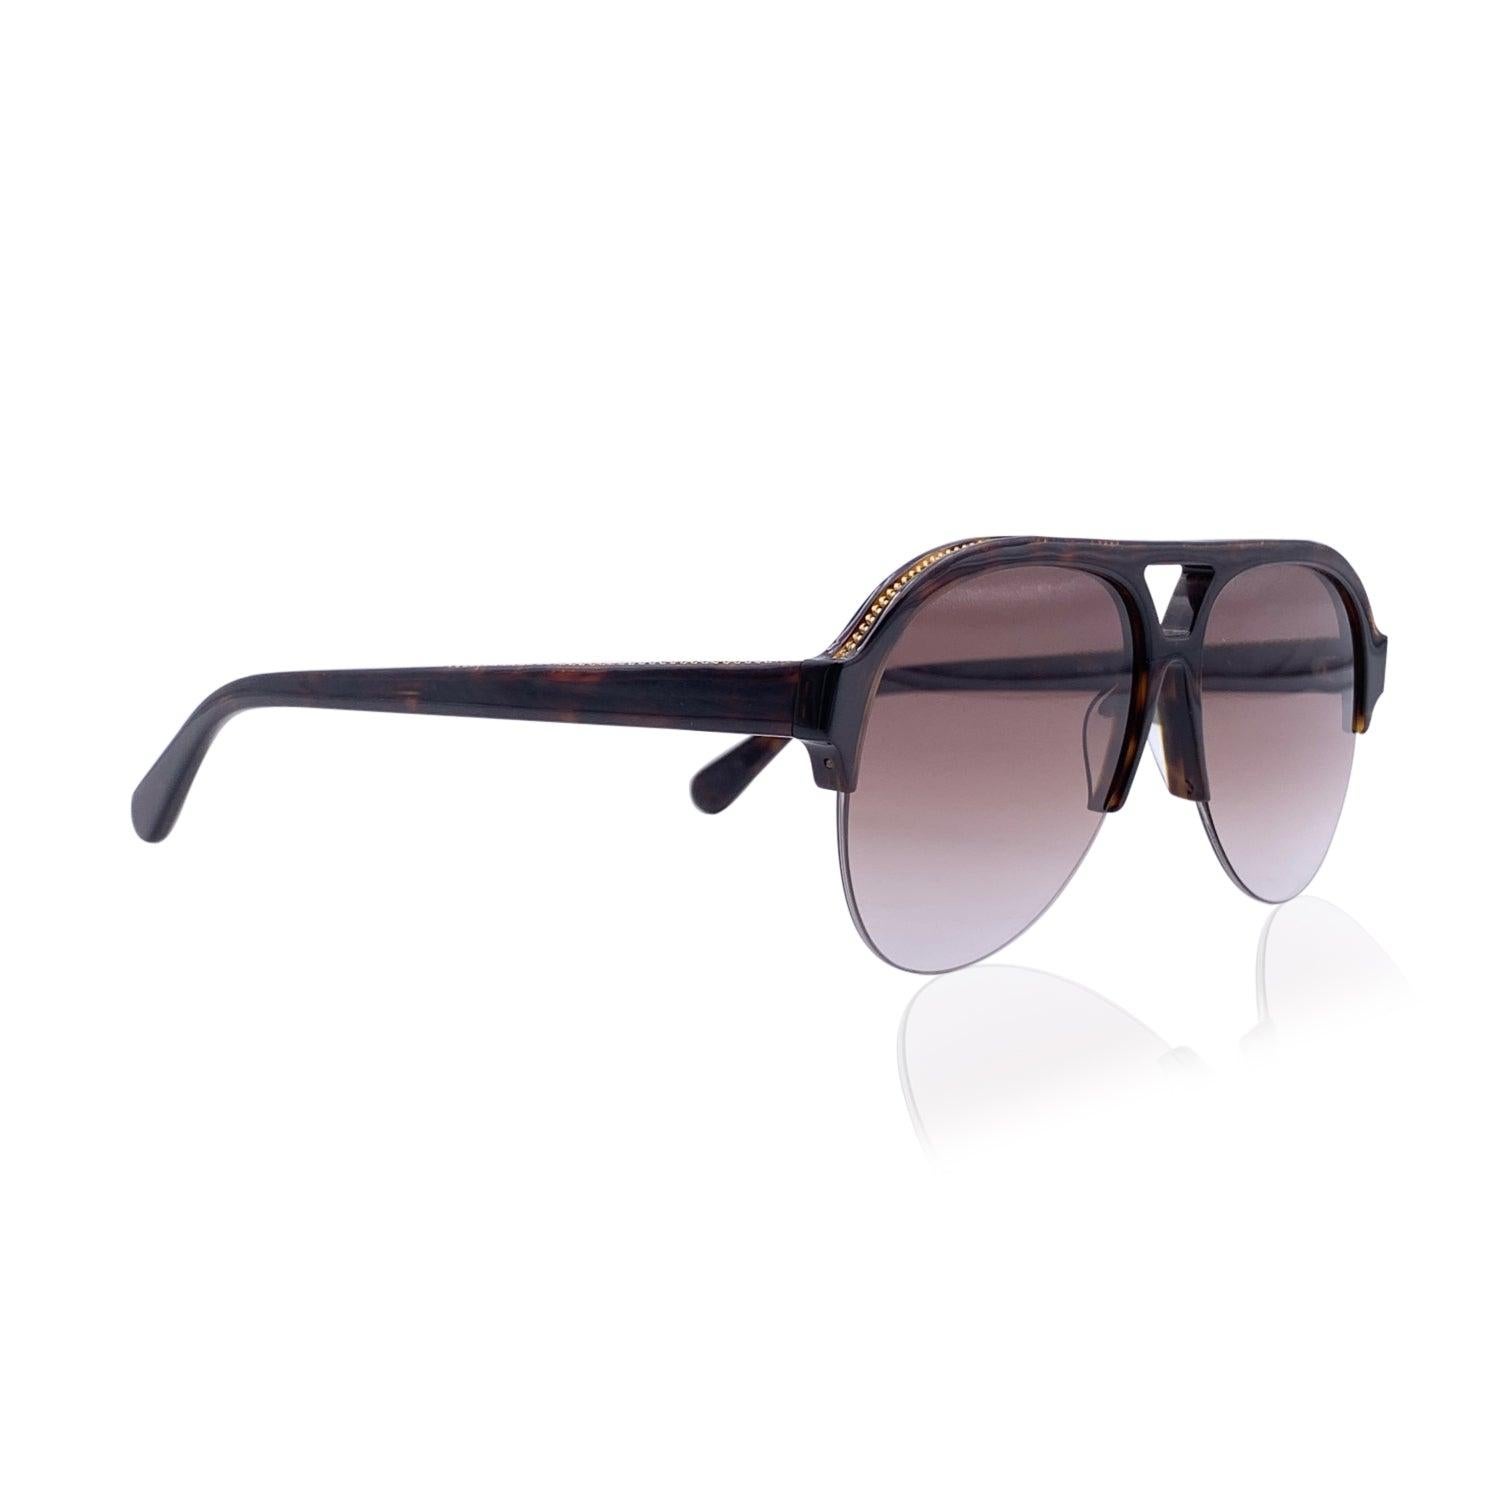 Stella McCartney aviator 'Falabella' sunglasses mod. SC0030S - c.002. They feature a half-rim brown frame in bio material. Gradient brown lenses. Gold metal chain detailing along the upper edges. Mod & refs.: mod. SC0030S - c.001 - 57/14 - 145. Made